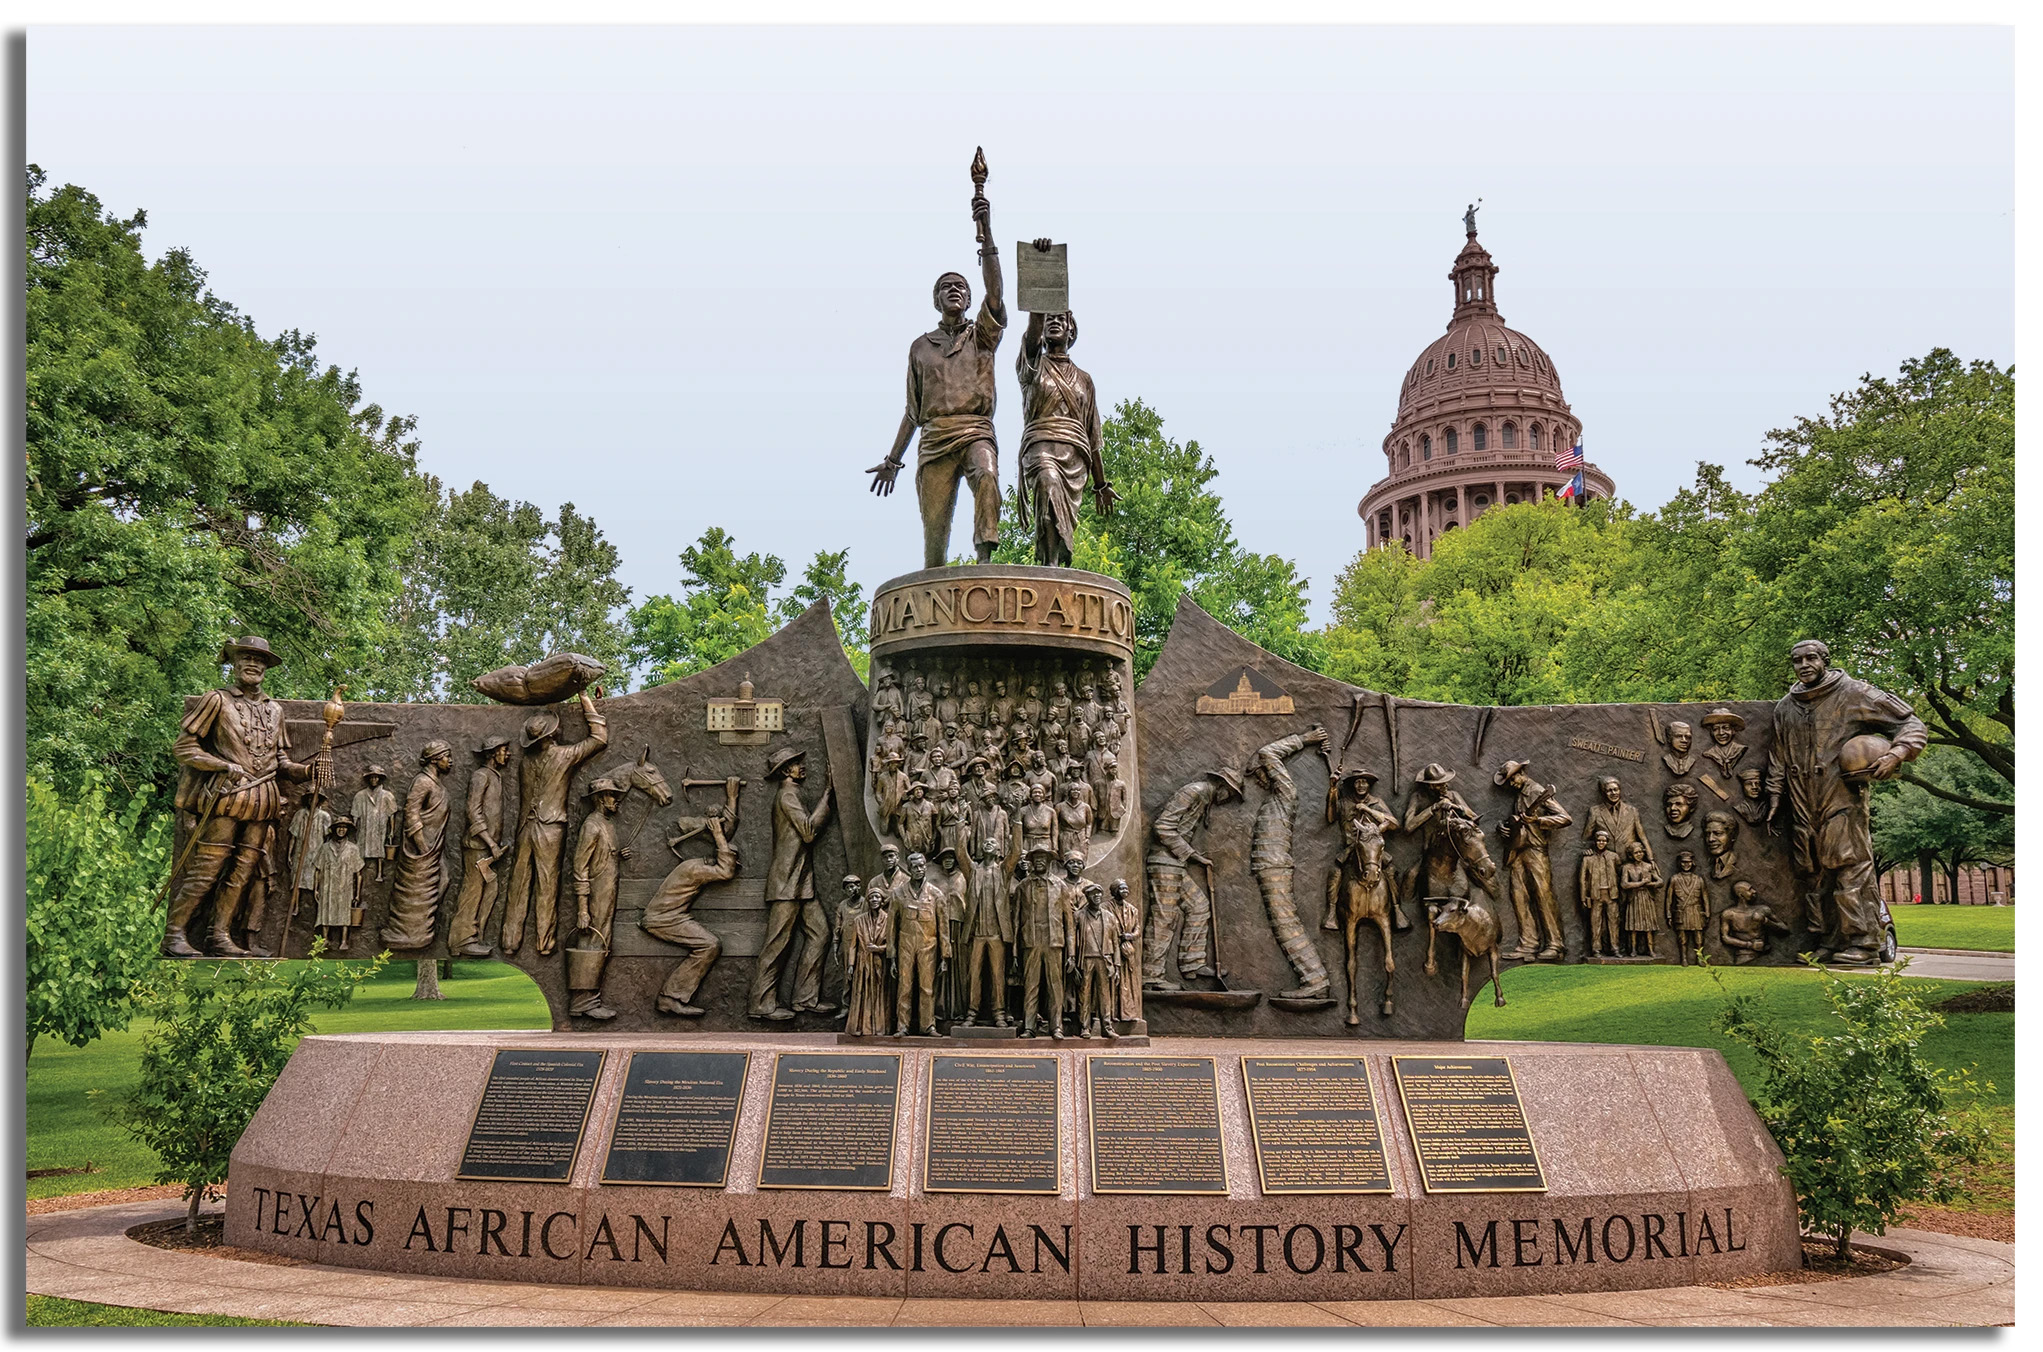 The Texas African American History Memorial